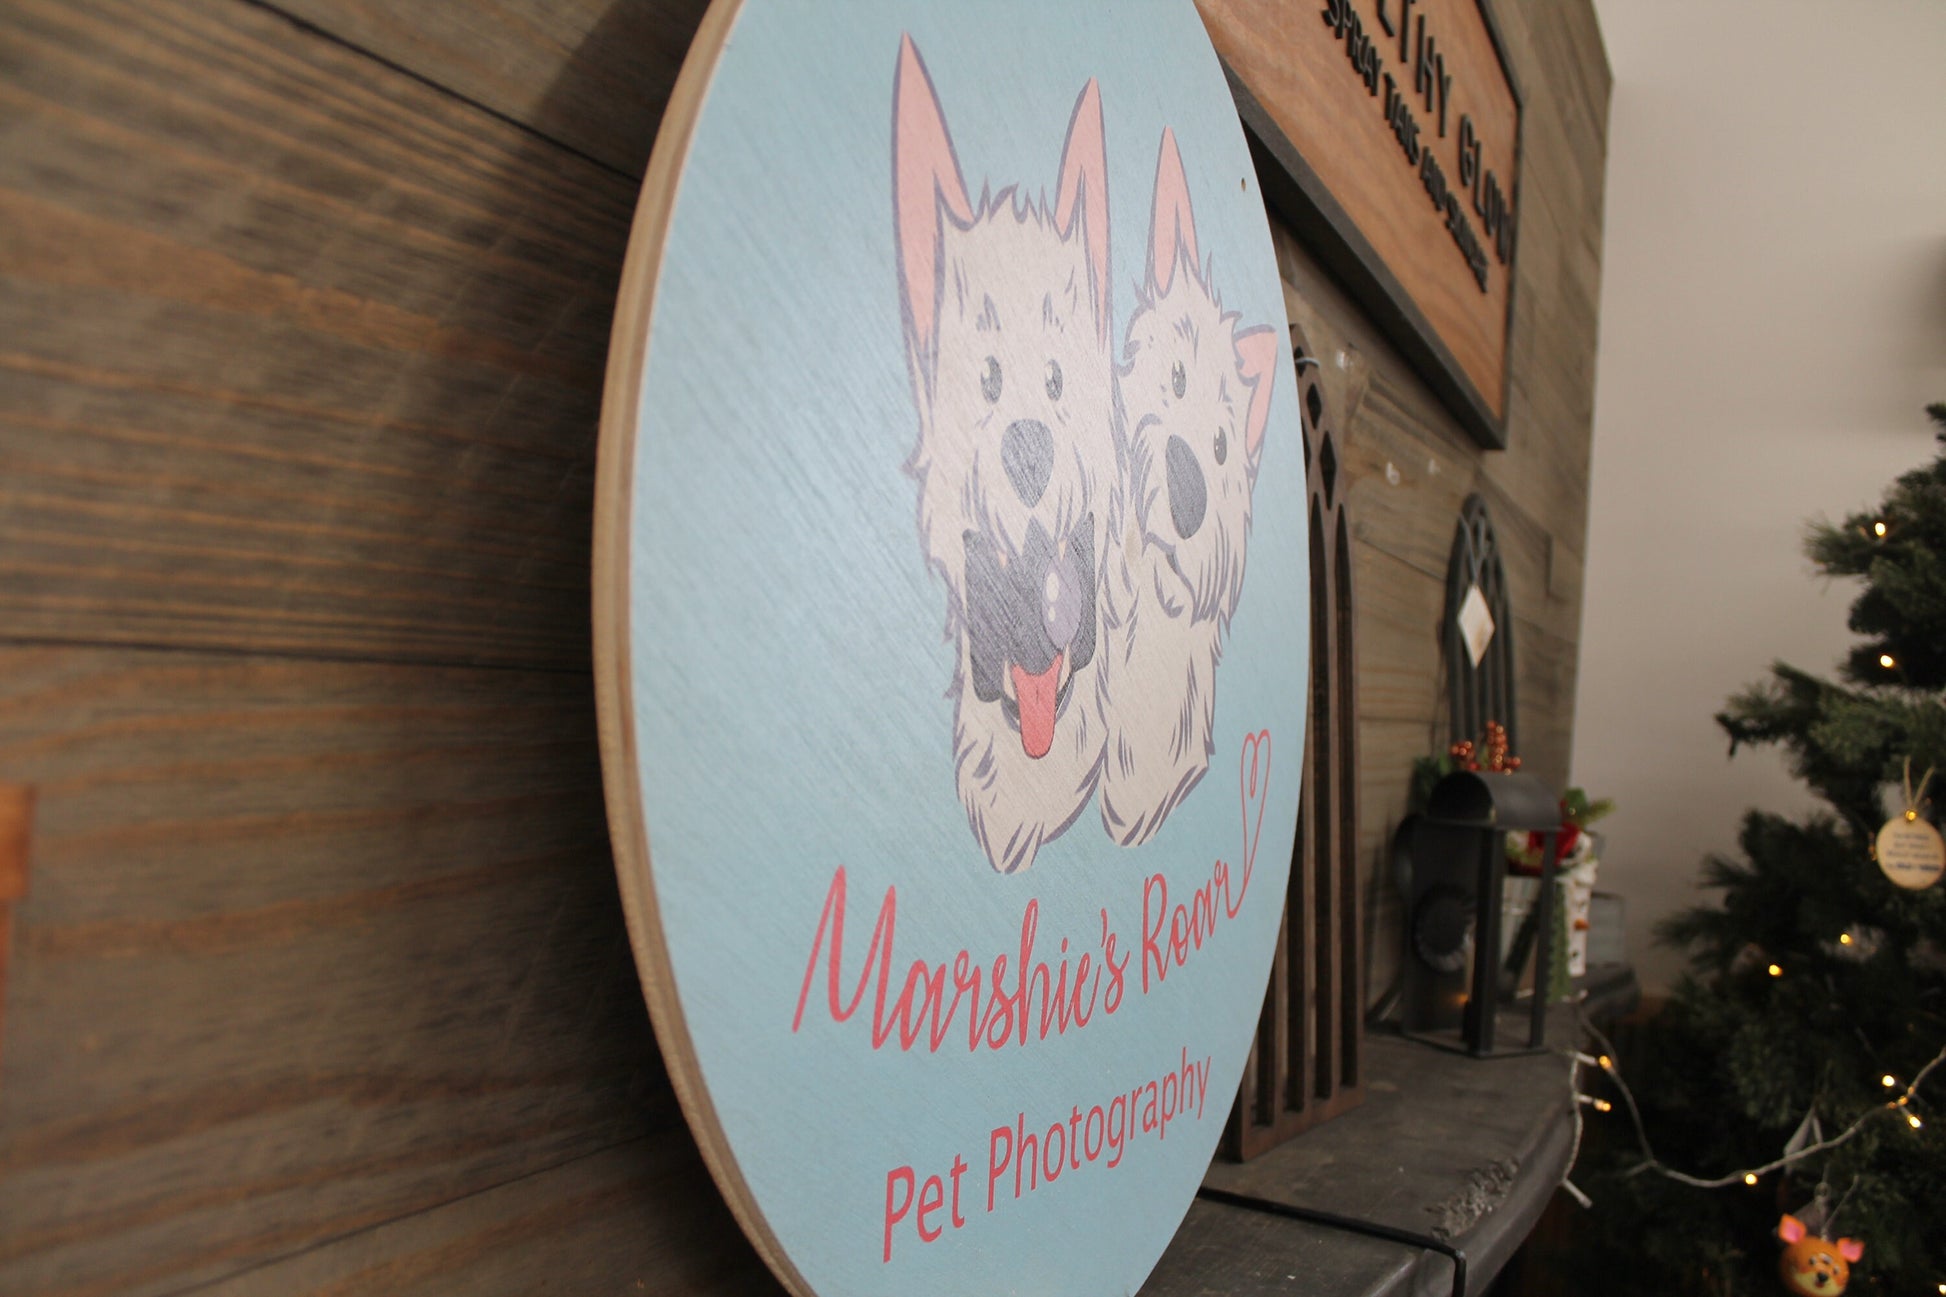 Small Business Sign Pet Photographer Dog Westie Logo Round Hanging Sign Design Booth Custom Circle Personalized Wall Art Color Wood Print